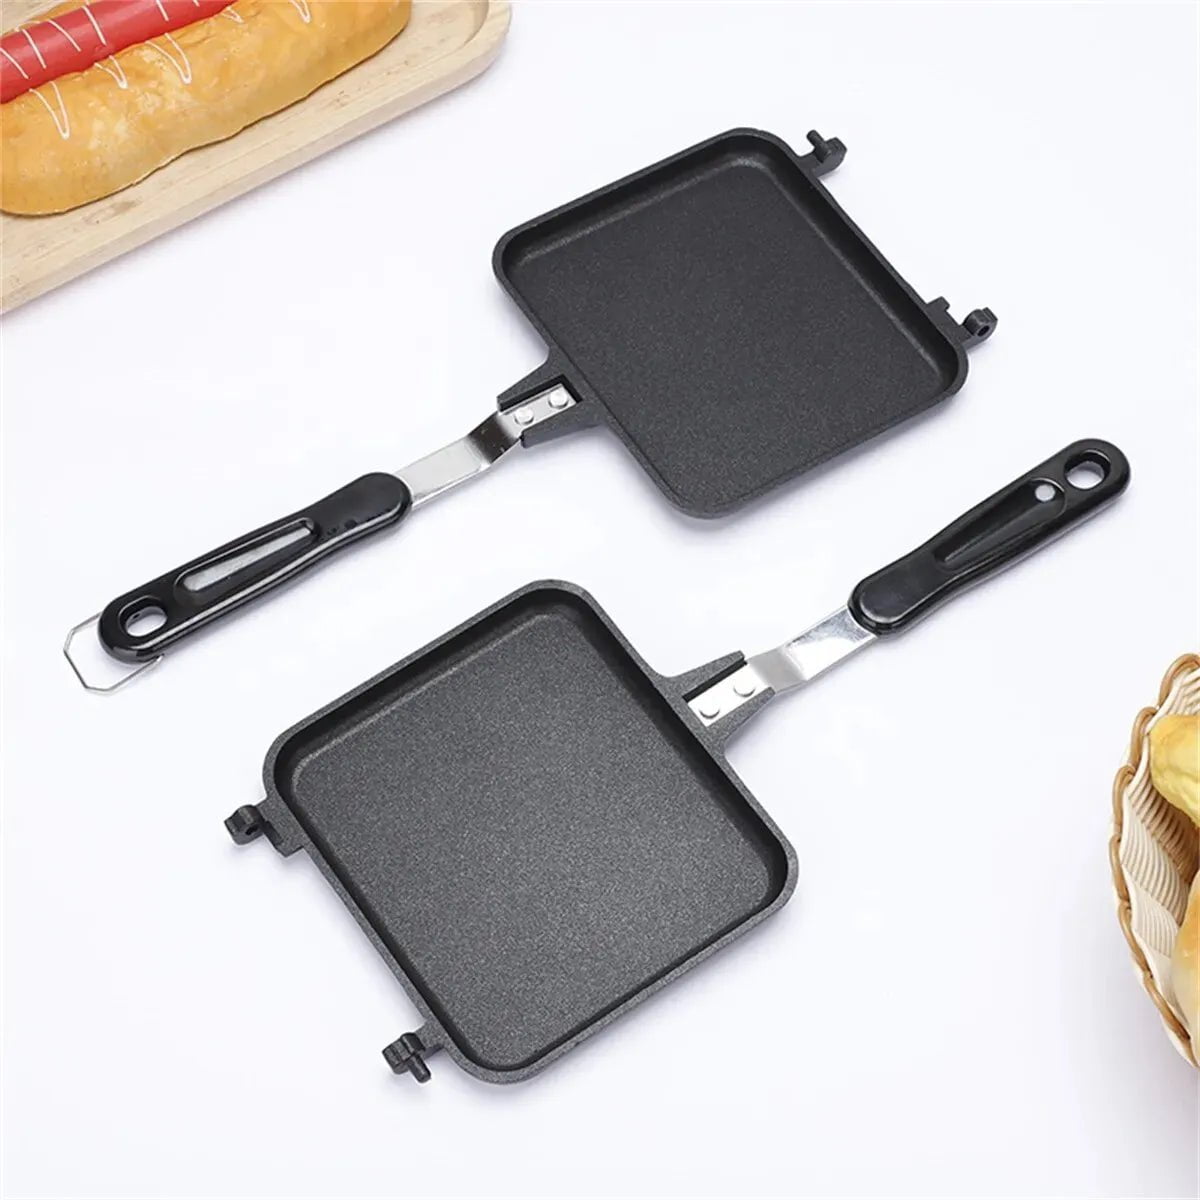 Double-Sided Non-Stick Grilled Sandwich and Panini Maker Pan with Handle - Aluminum Flip Pan, Sandwich Maker Black